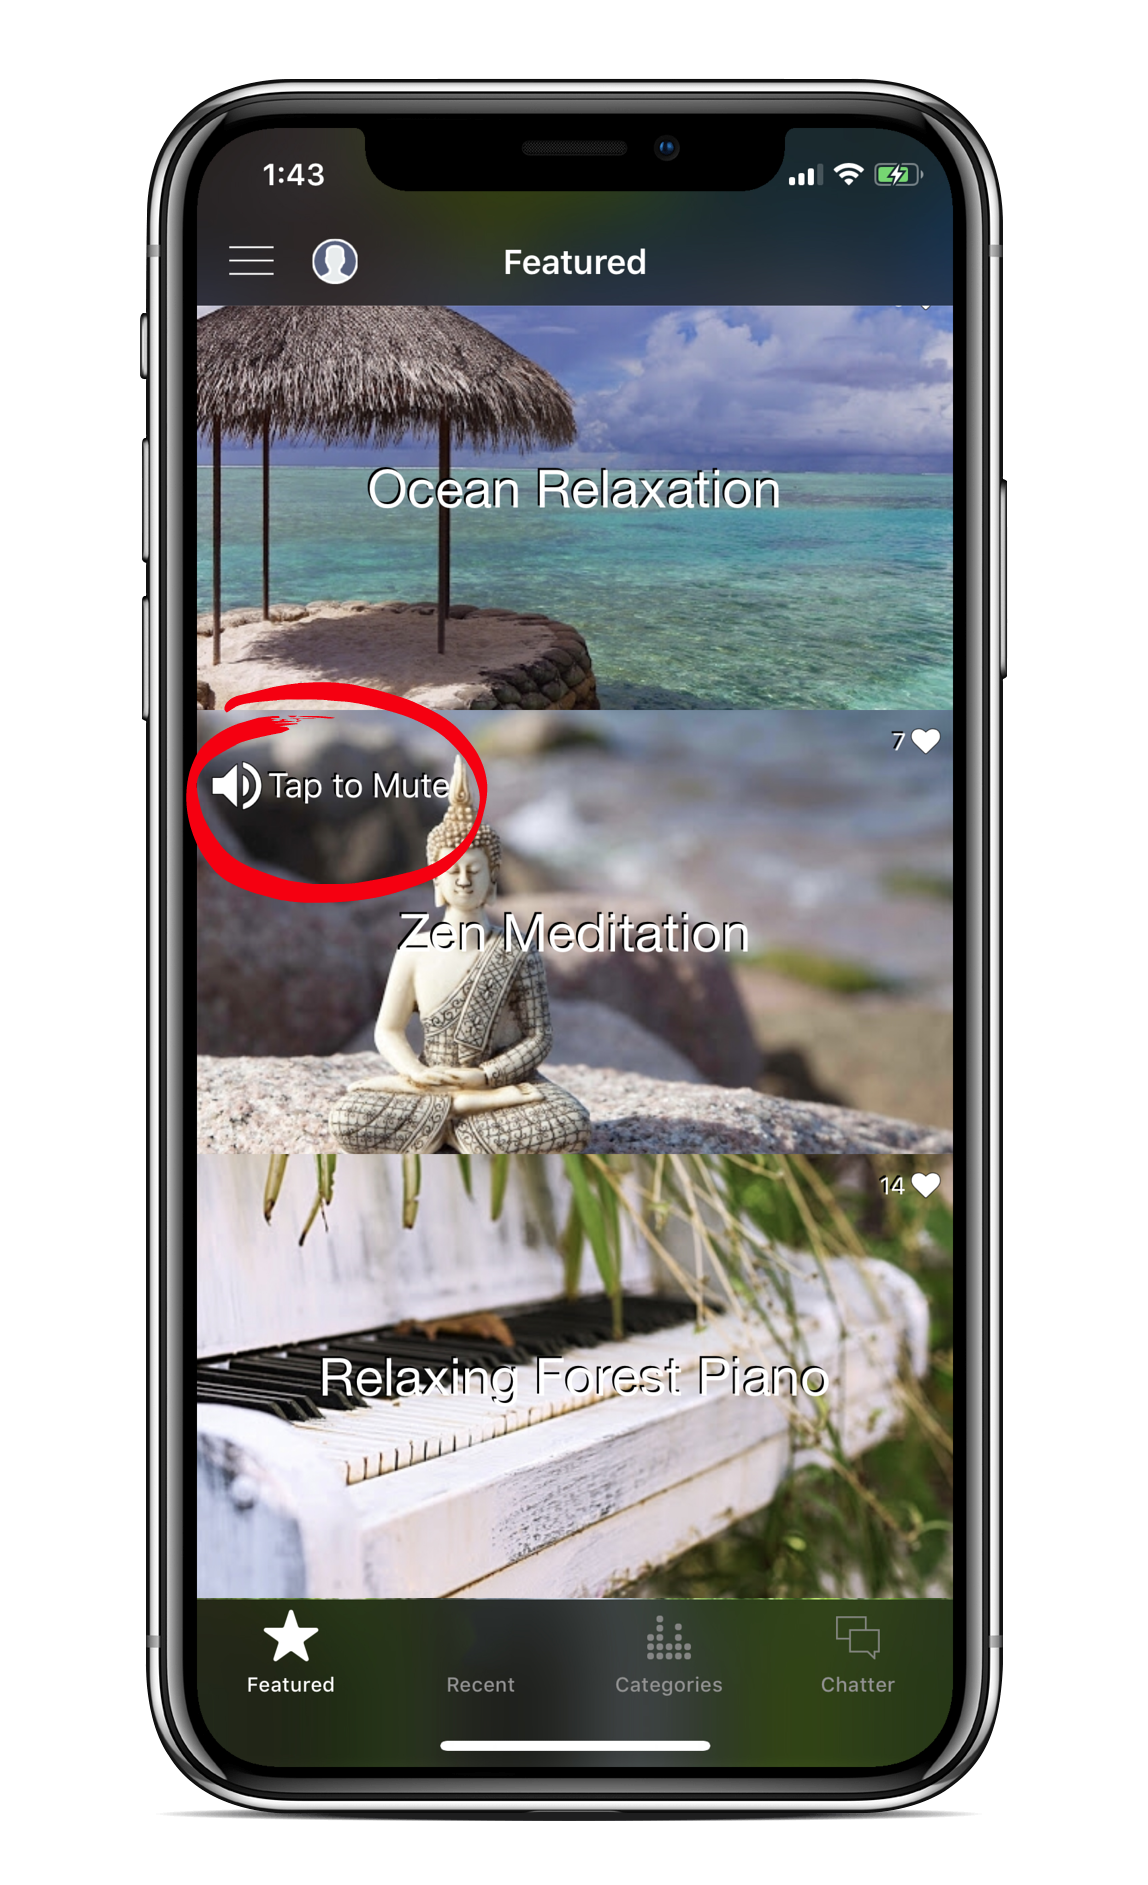 Tap to mute or unmute audio preview in list view in White Noise Market App